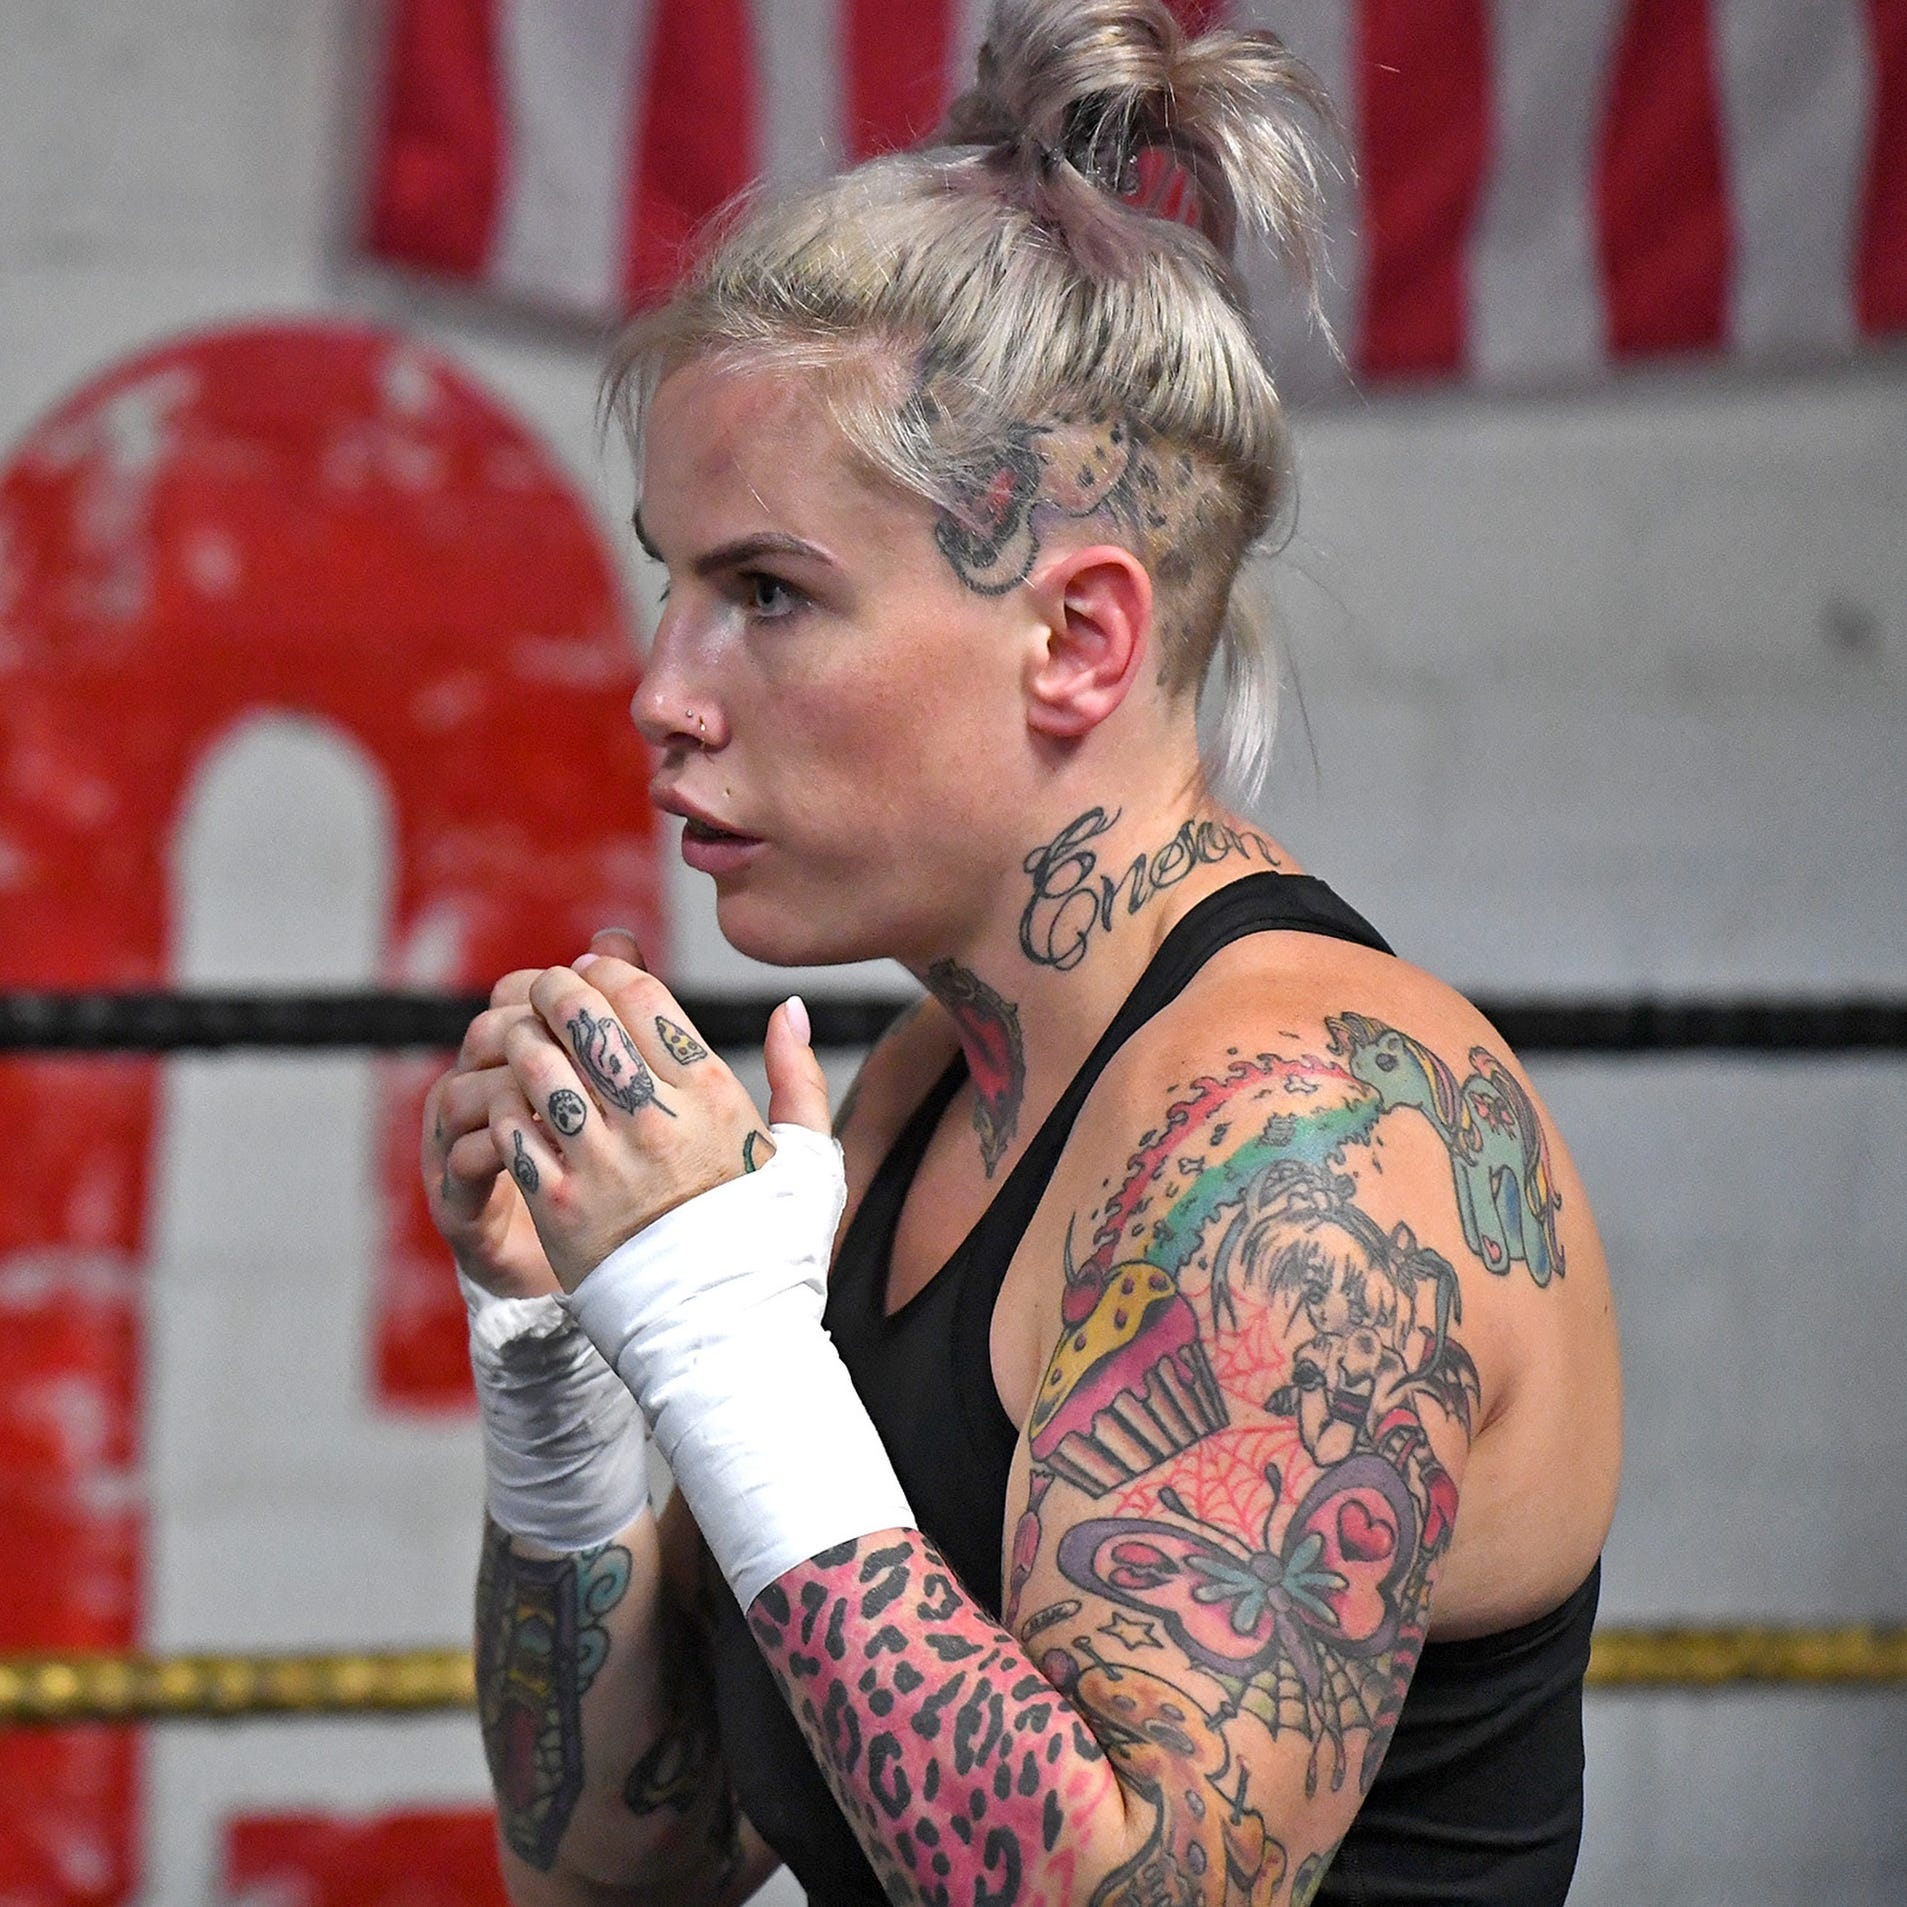 Bec Rawlings improved to 2-0 as a bare-knuckle boxer.